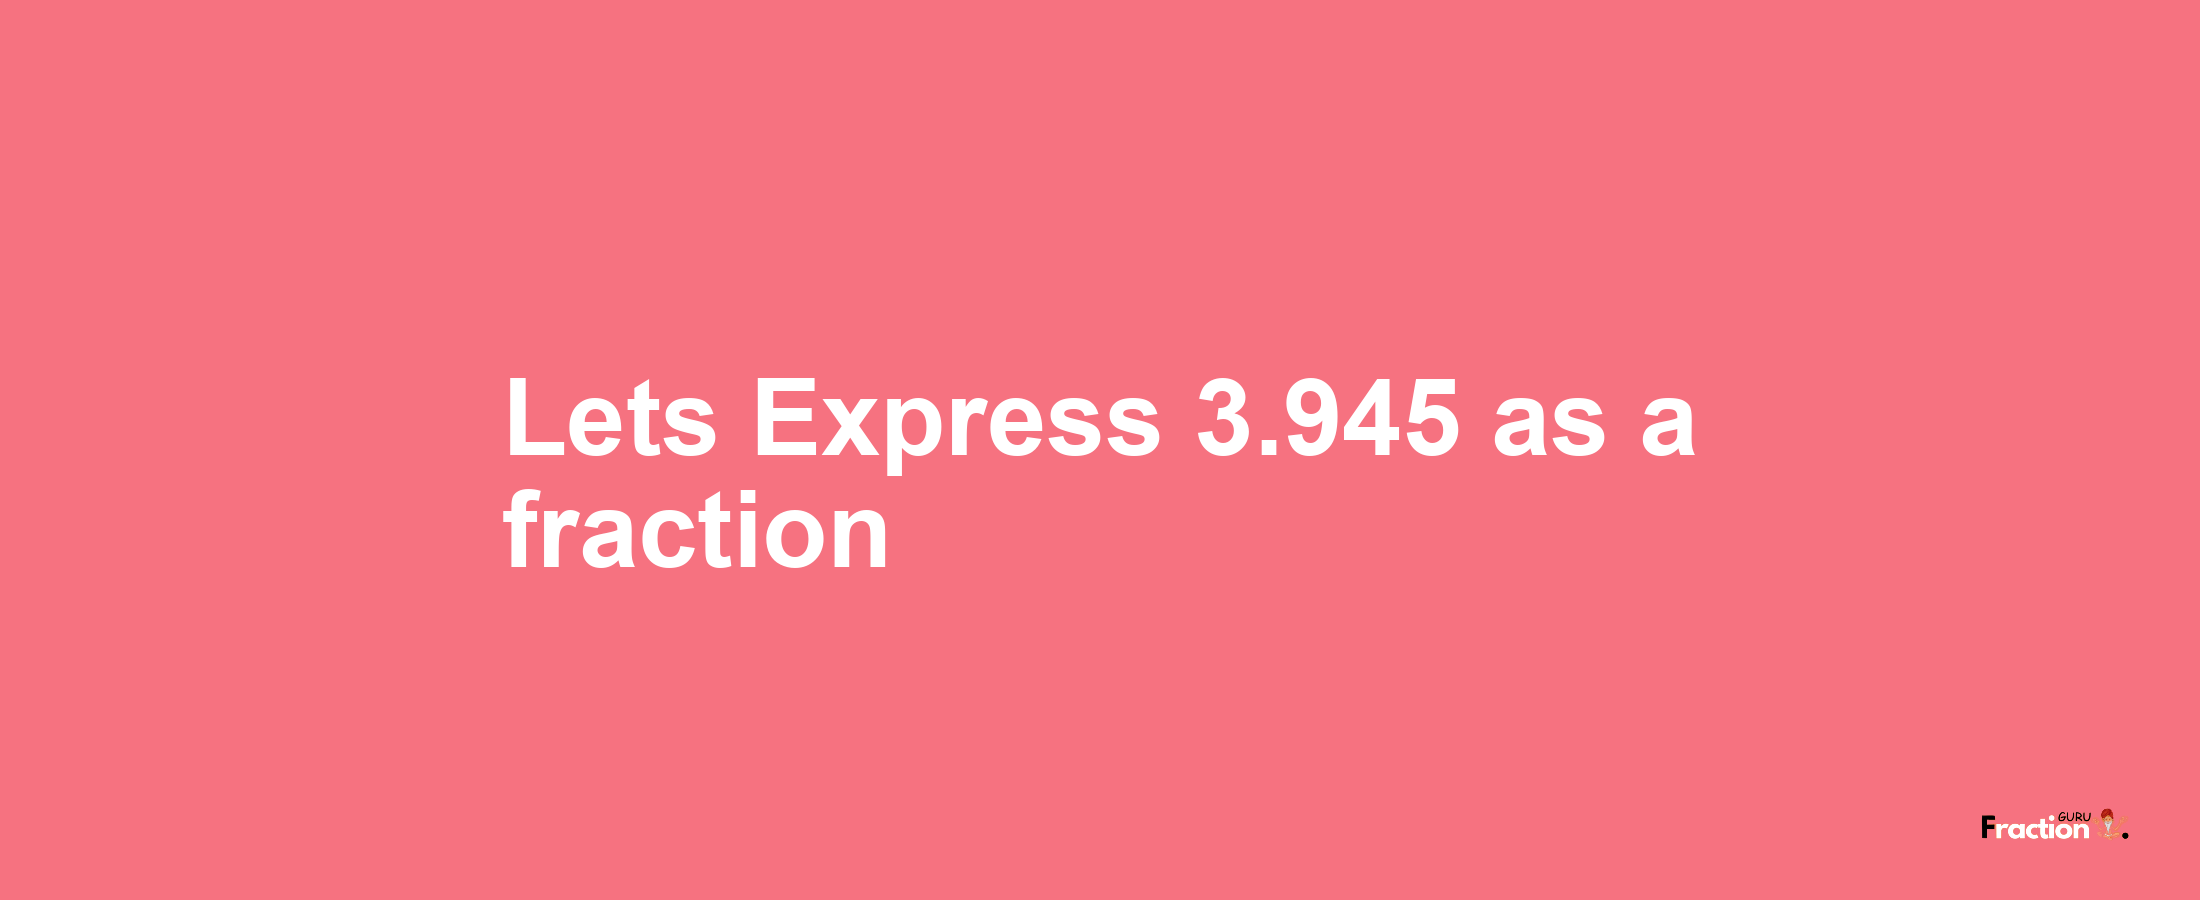 Lets Express 3.945 as afraction